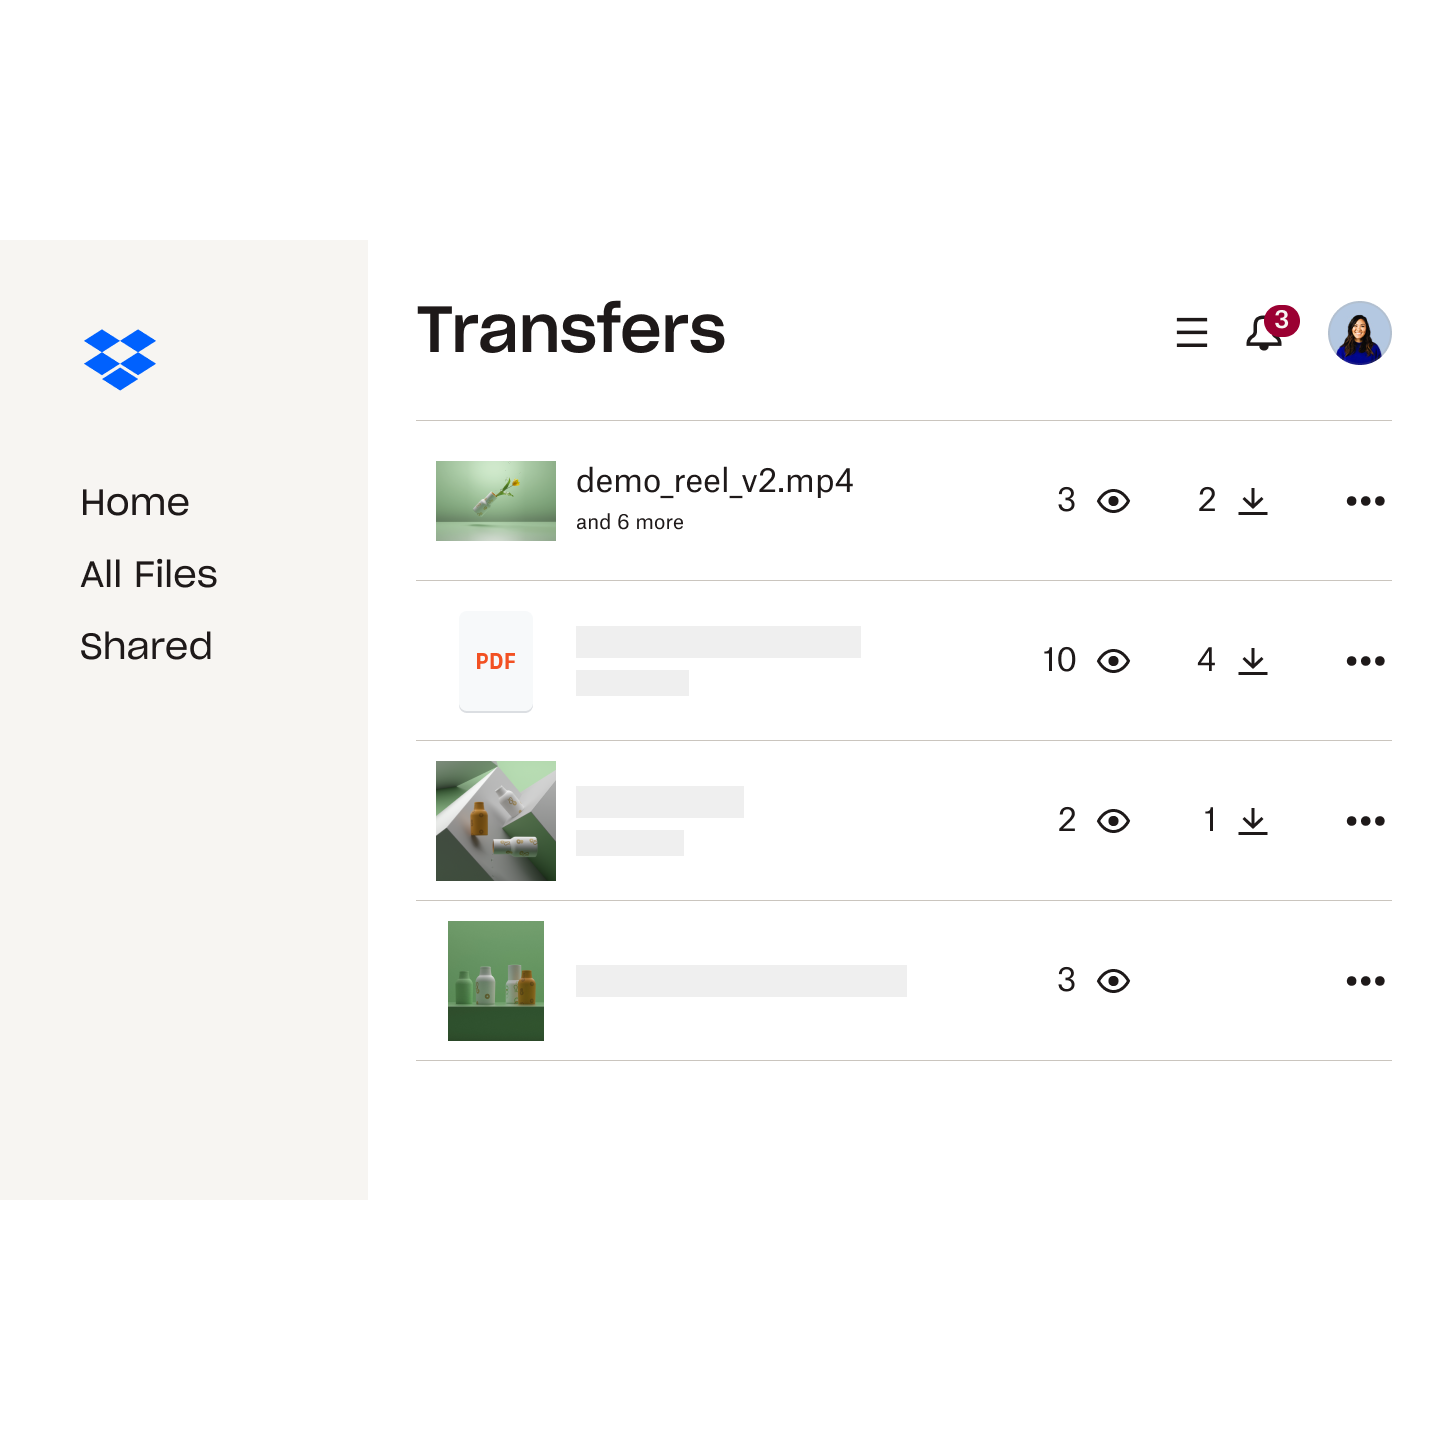 A list of files in Dropbox Transfer, each with a view and download counts.